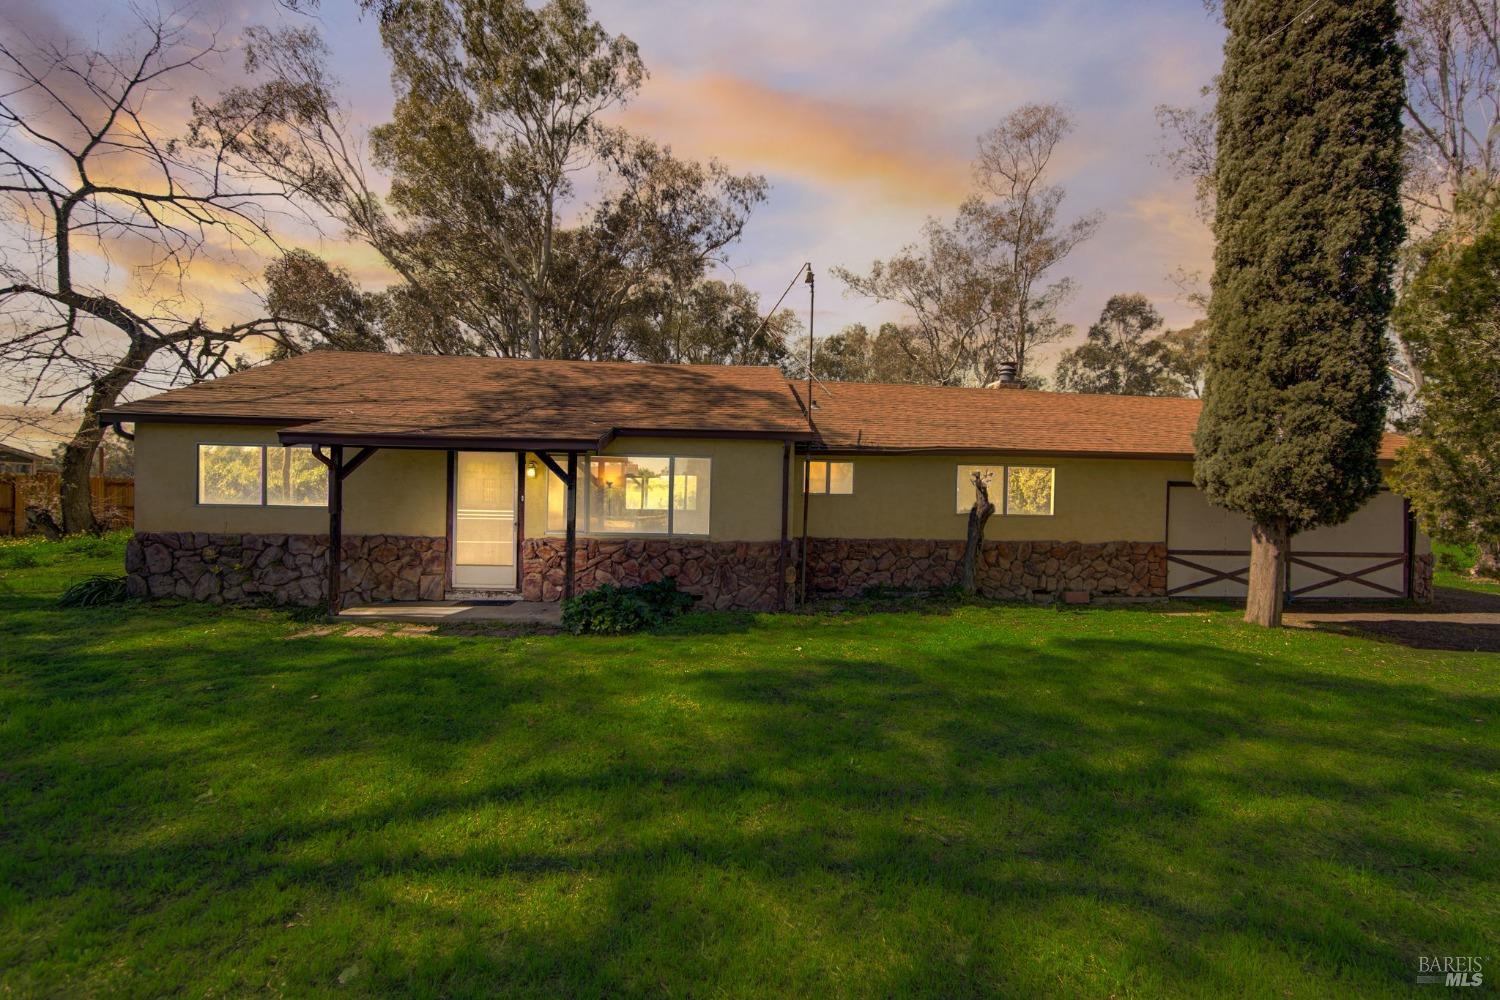 Photo of 7401 Locke Rd in Vacaville, CA